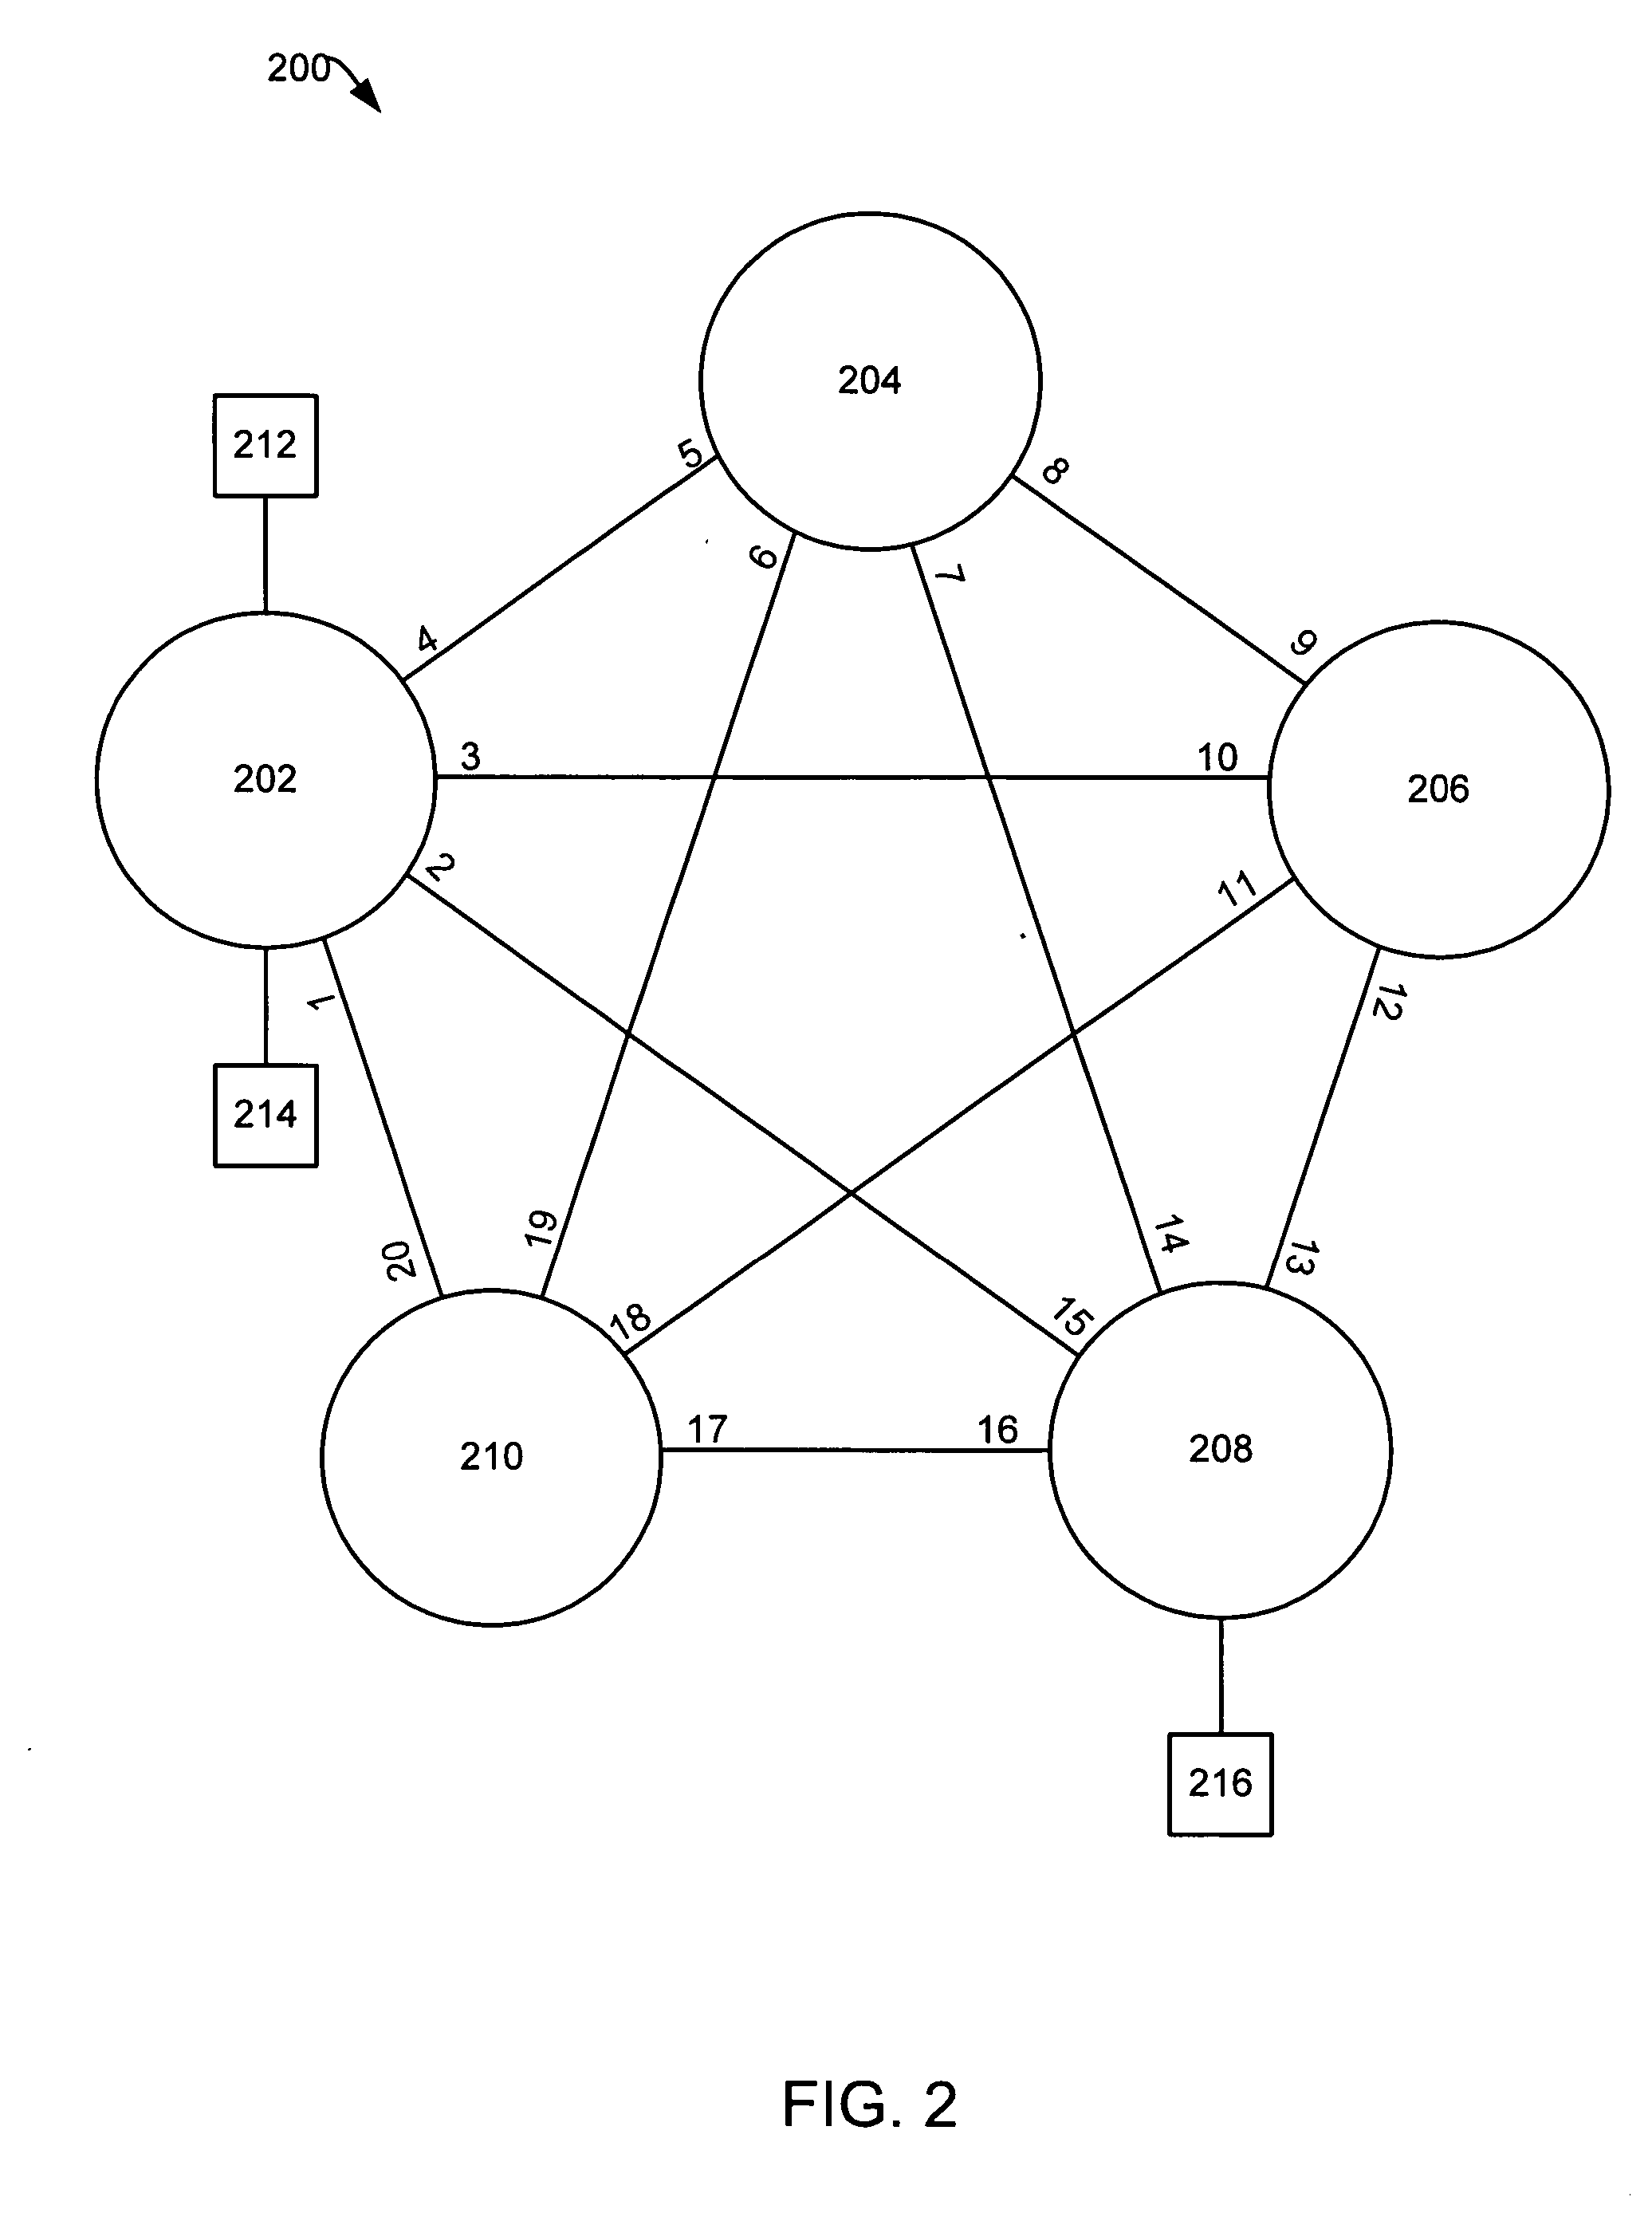 Switch meshing using multiple directional spanning trees